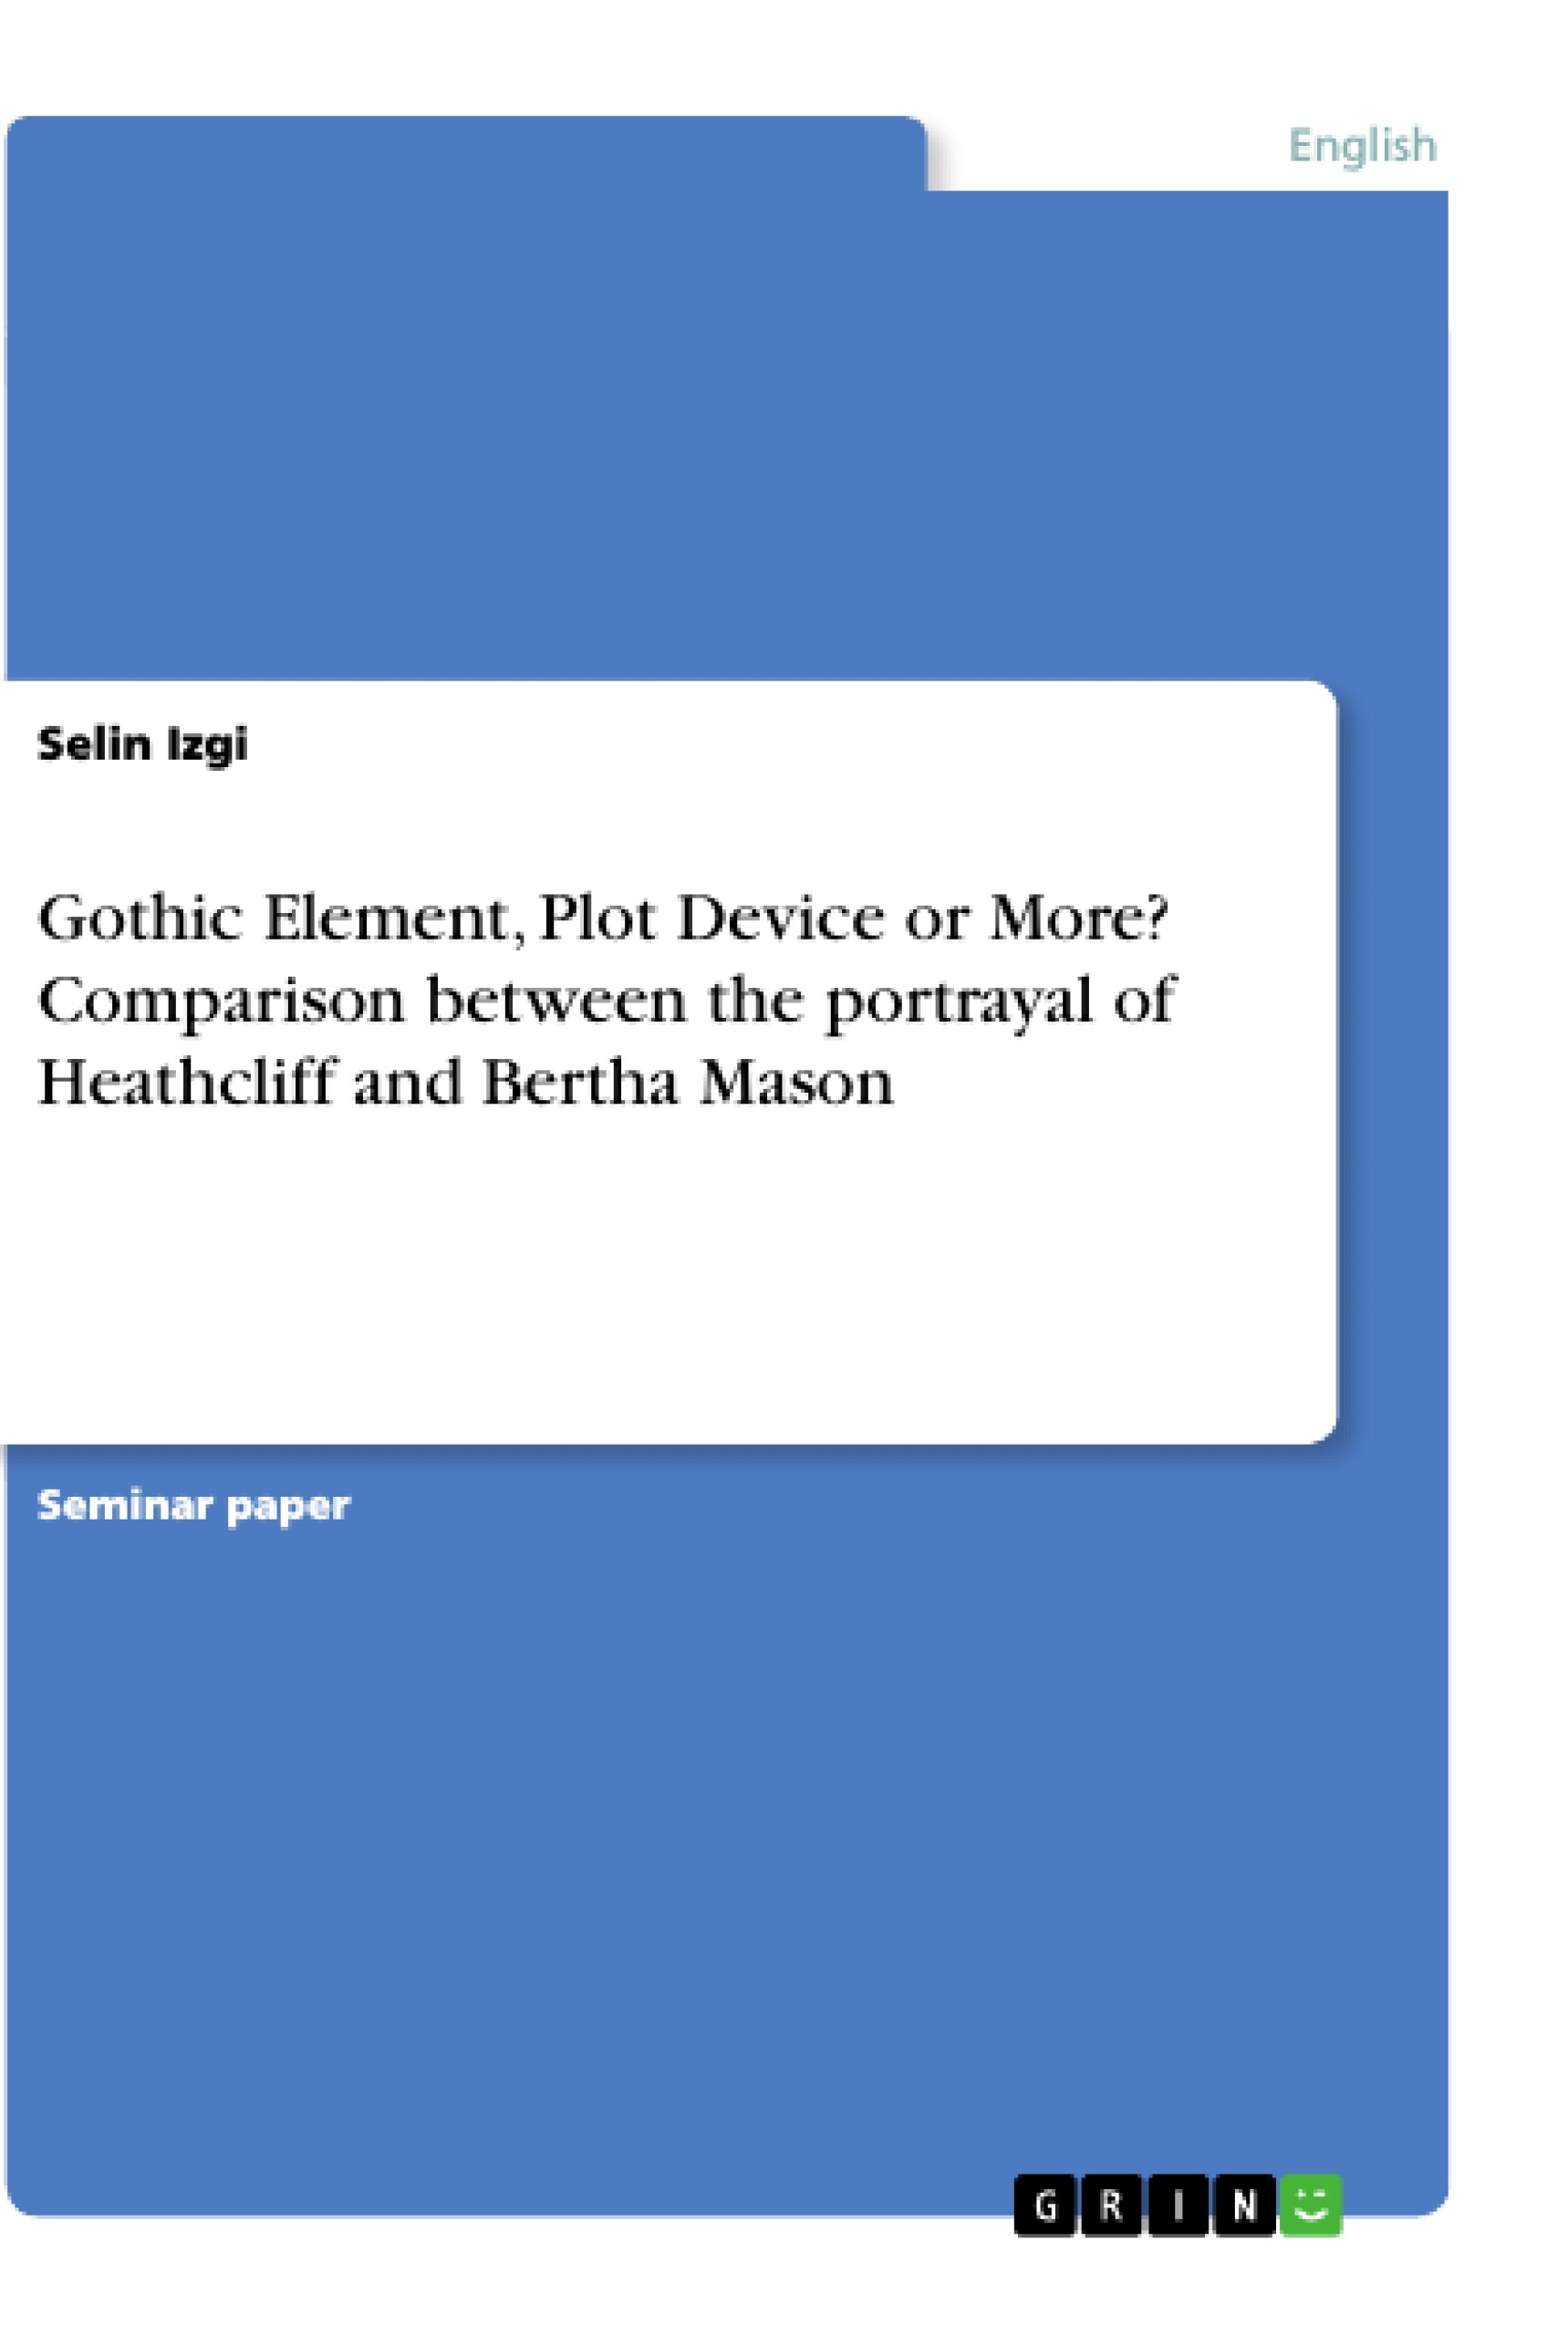 Title: Gothic Element, Plot Device or More? Comparison between the portrayal of Heathcliff and Bertha Mason